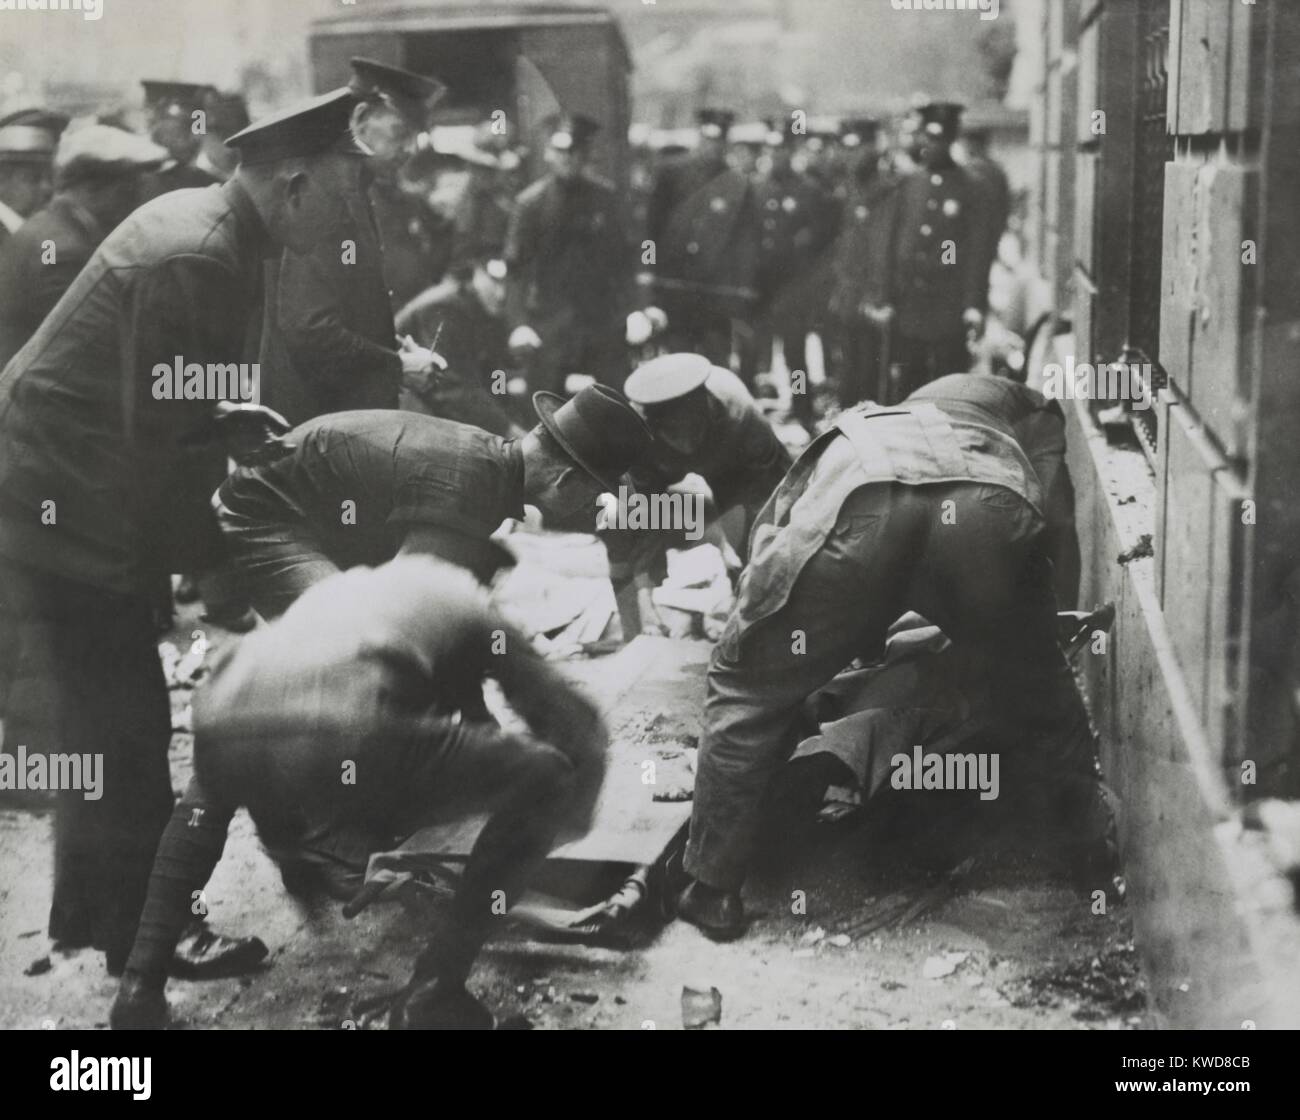 Police removing rubble to reach bodies after the Wall St. Bombing, Sept. 16, 1920, New York City. (BSLOC 2015 17 239) Stock Photo